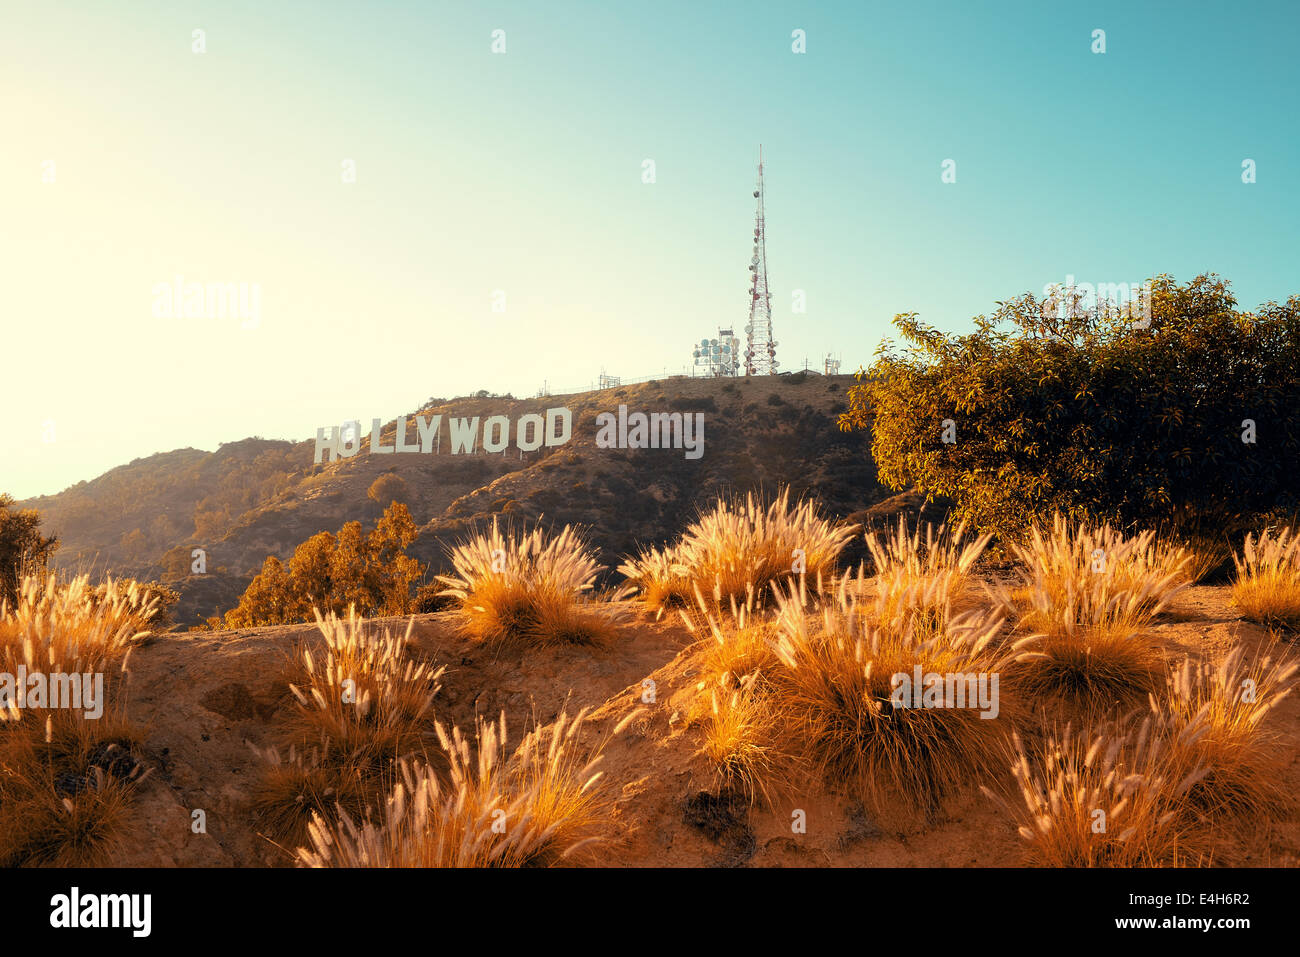 Los Angeles, CA - MAY 18: Hollywood sign on mountain on May 18, 2014 in Los Angeles. Originated as a real estate promotion, it is now the famous landmark of LA and US. Stock Photo